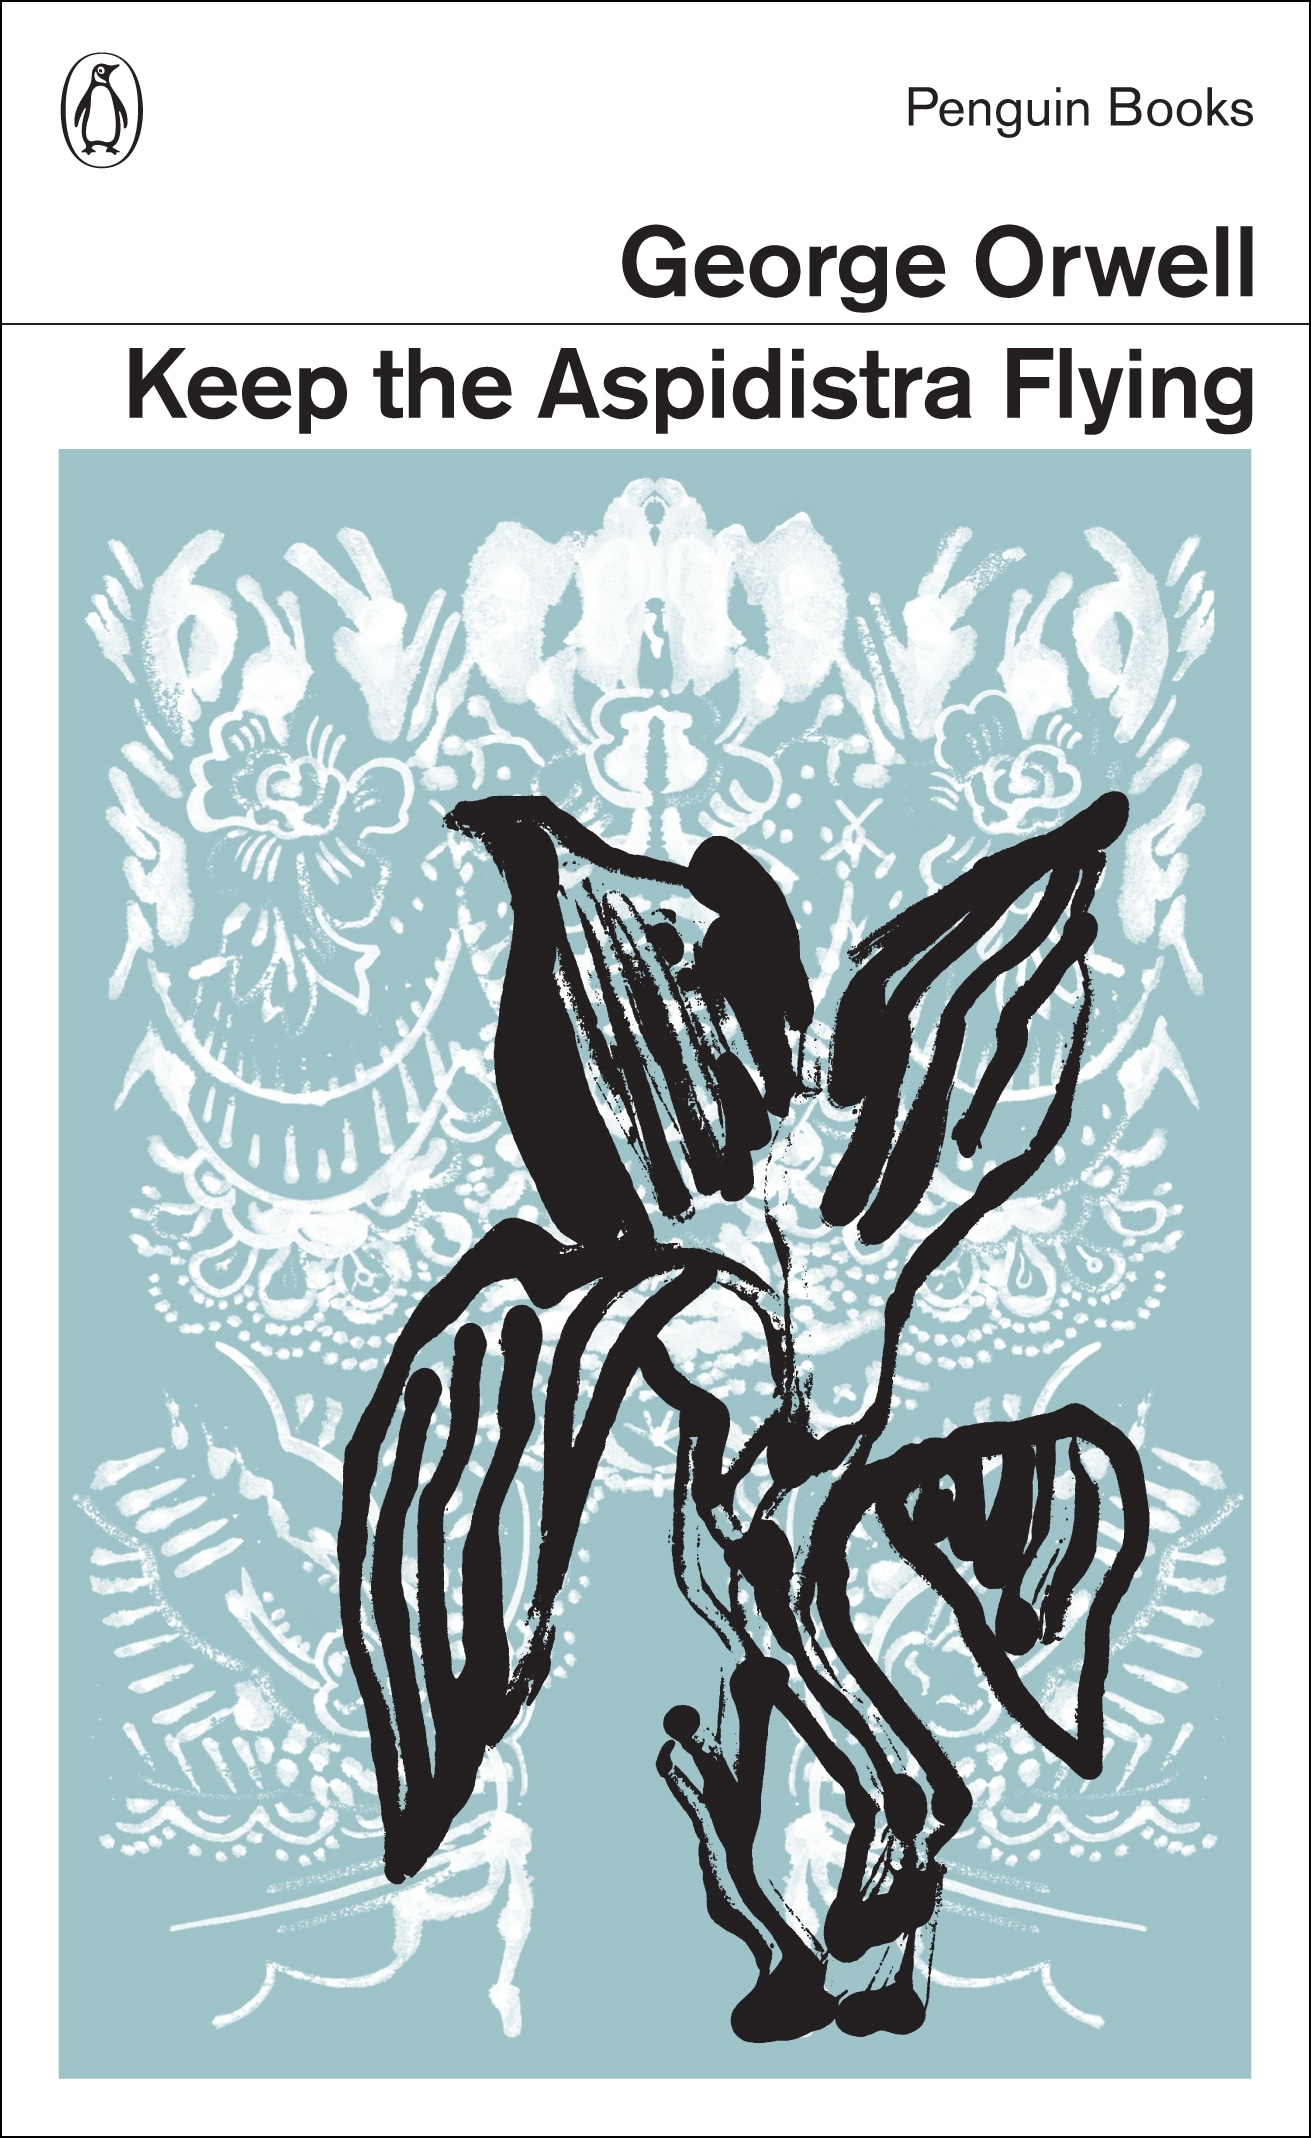 Book “Keep the Aspidistra Flying” by George Orwell — January 2, 2014